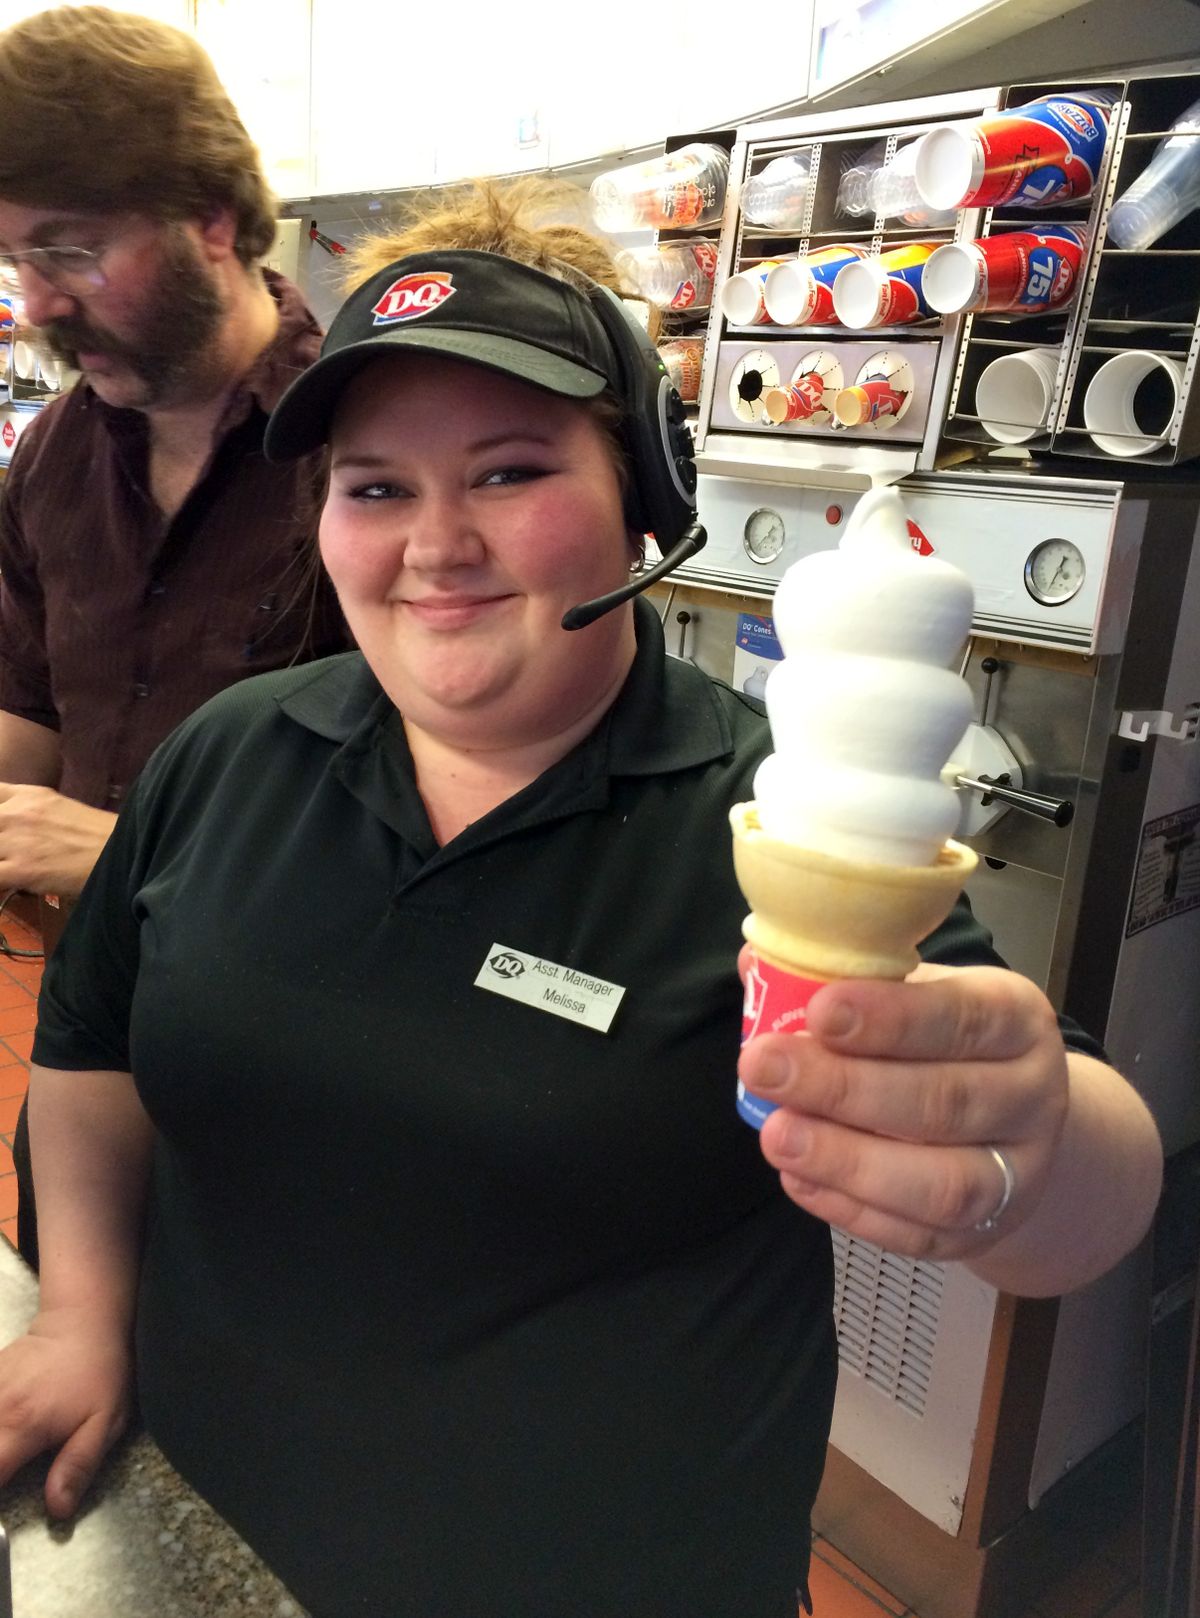 Melissa Young, assistant manager of the Coeur d’Alene Dairy Queen, hands me my first free cone. (Doug Clark)